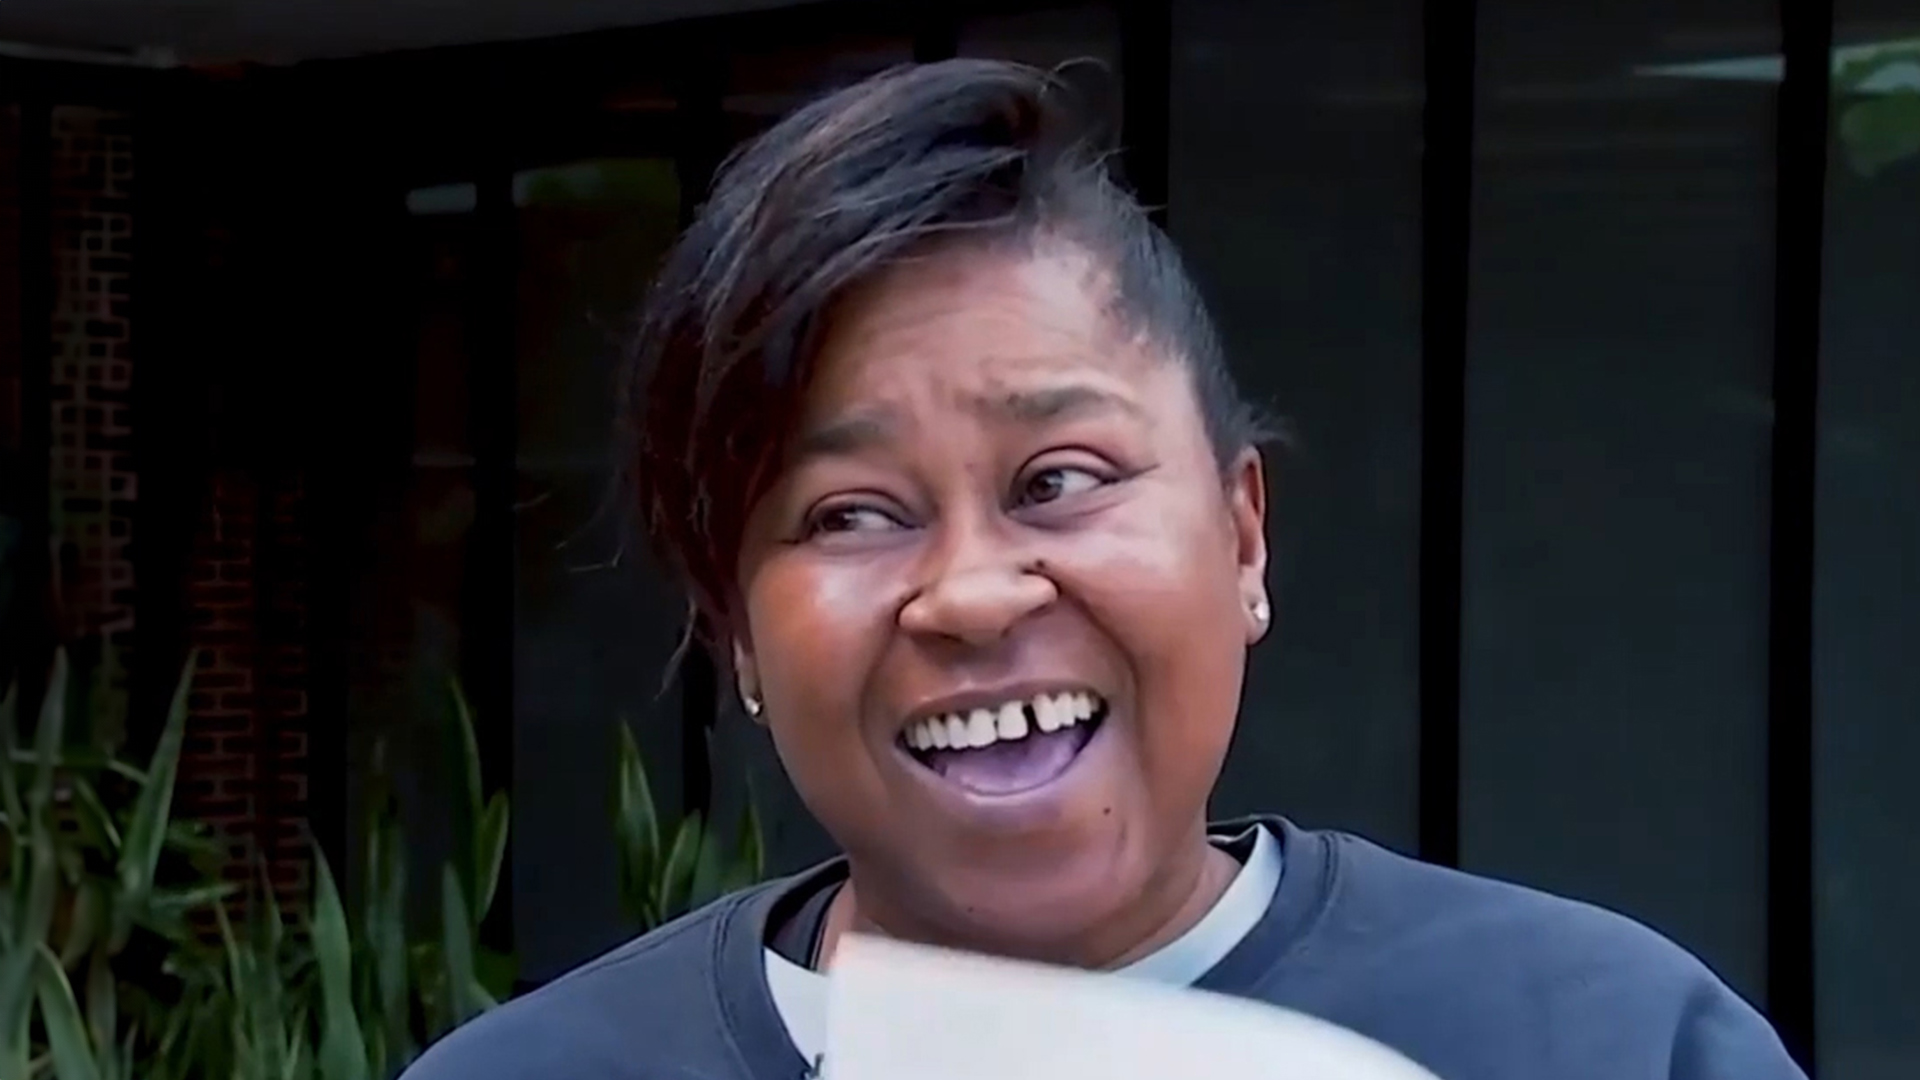 No one knows to do that lottery winner fumes after shes told she cant collect prize – they said she owed them money [Video]